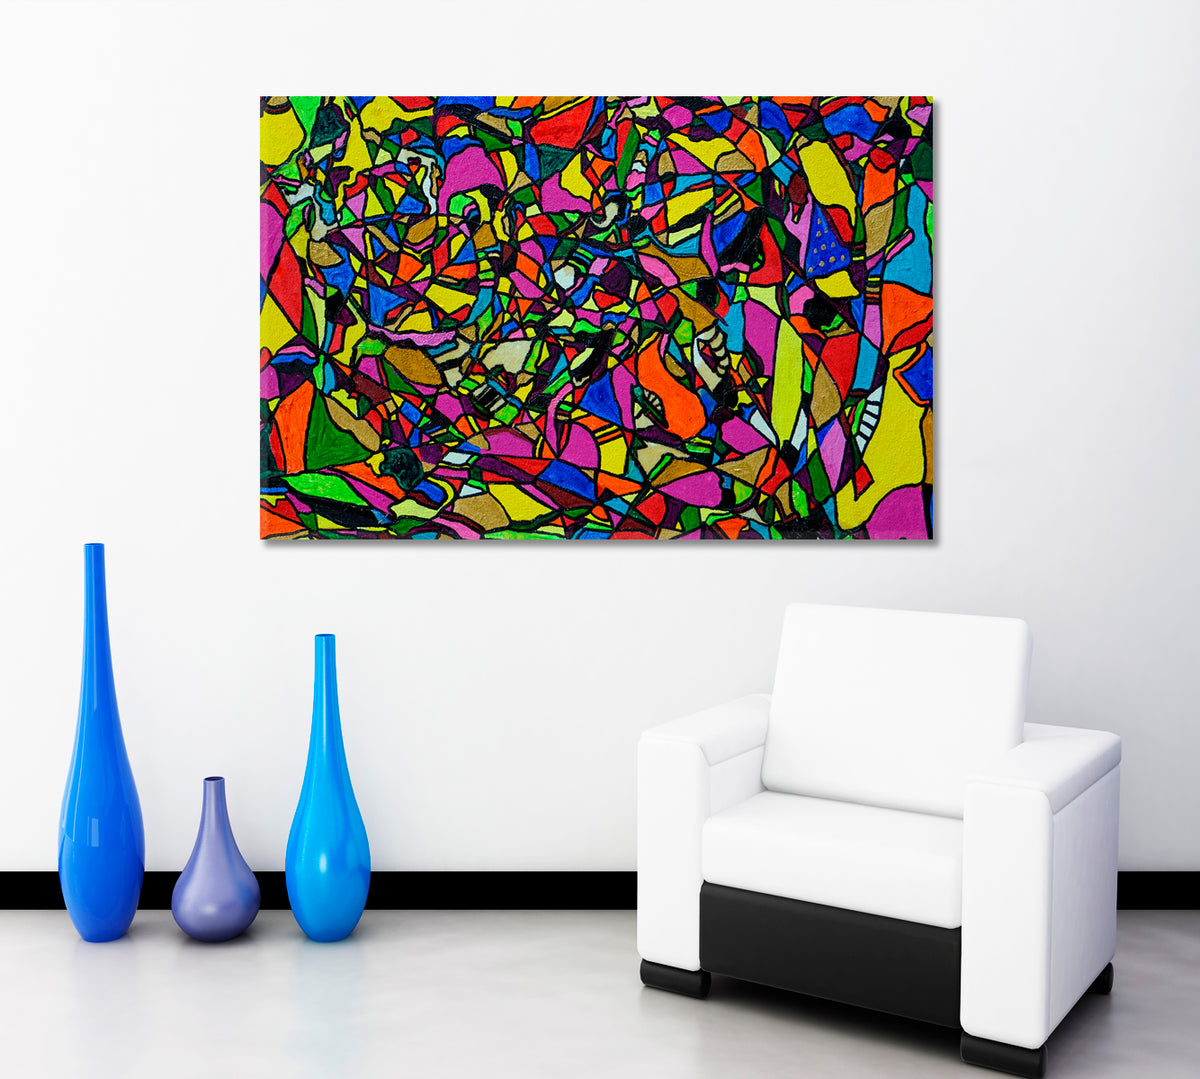 Abstract Vibrant Geometric Shapes Abstract Art Print Artesty 1 panel 24" x 16" 